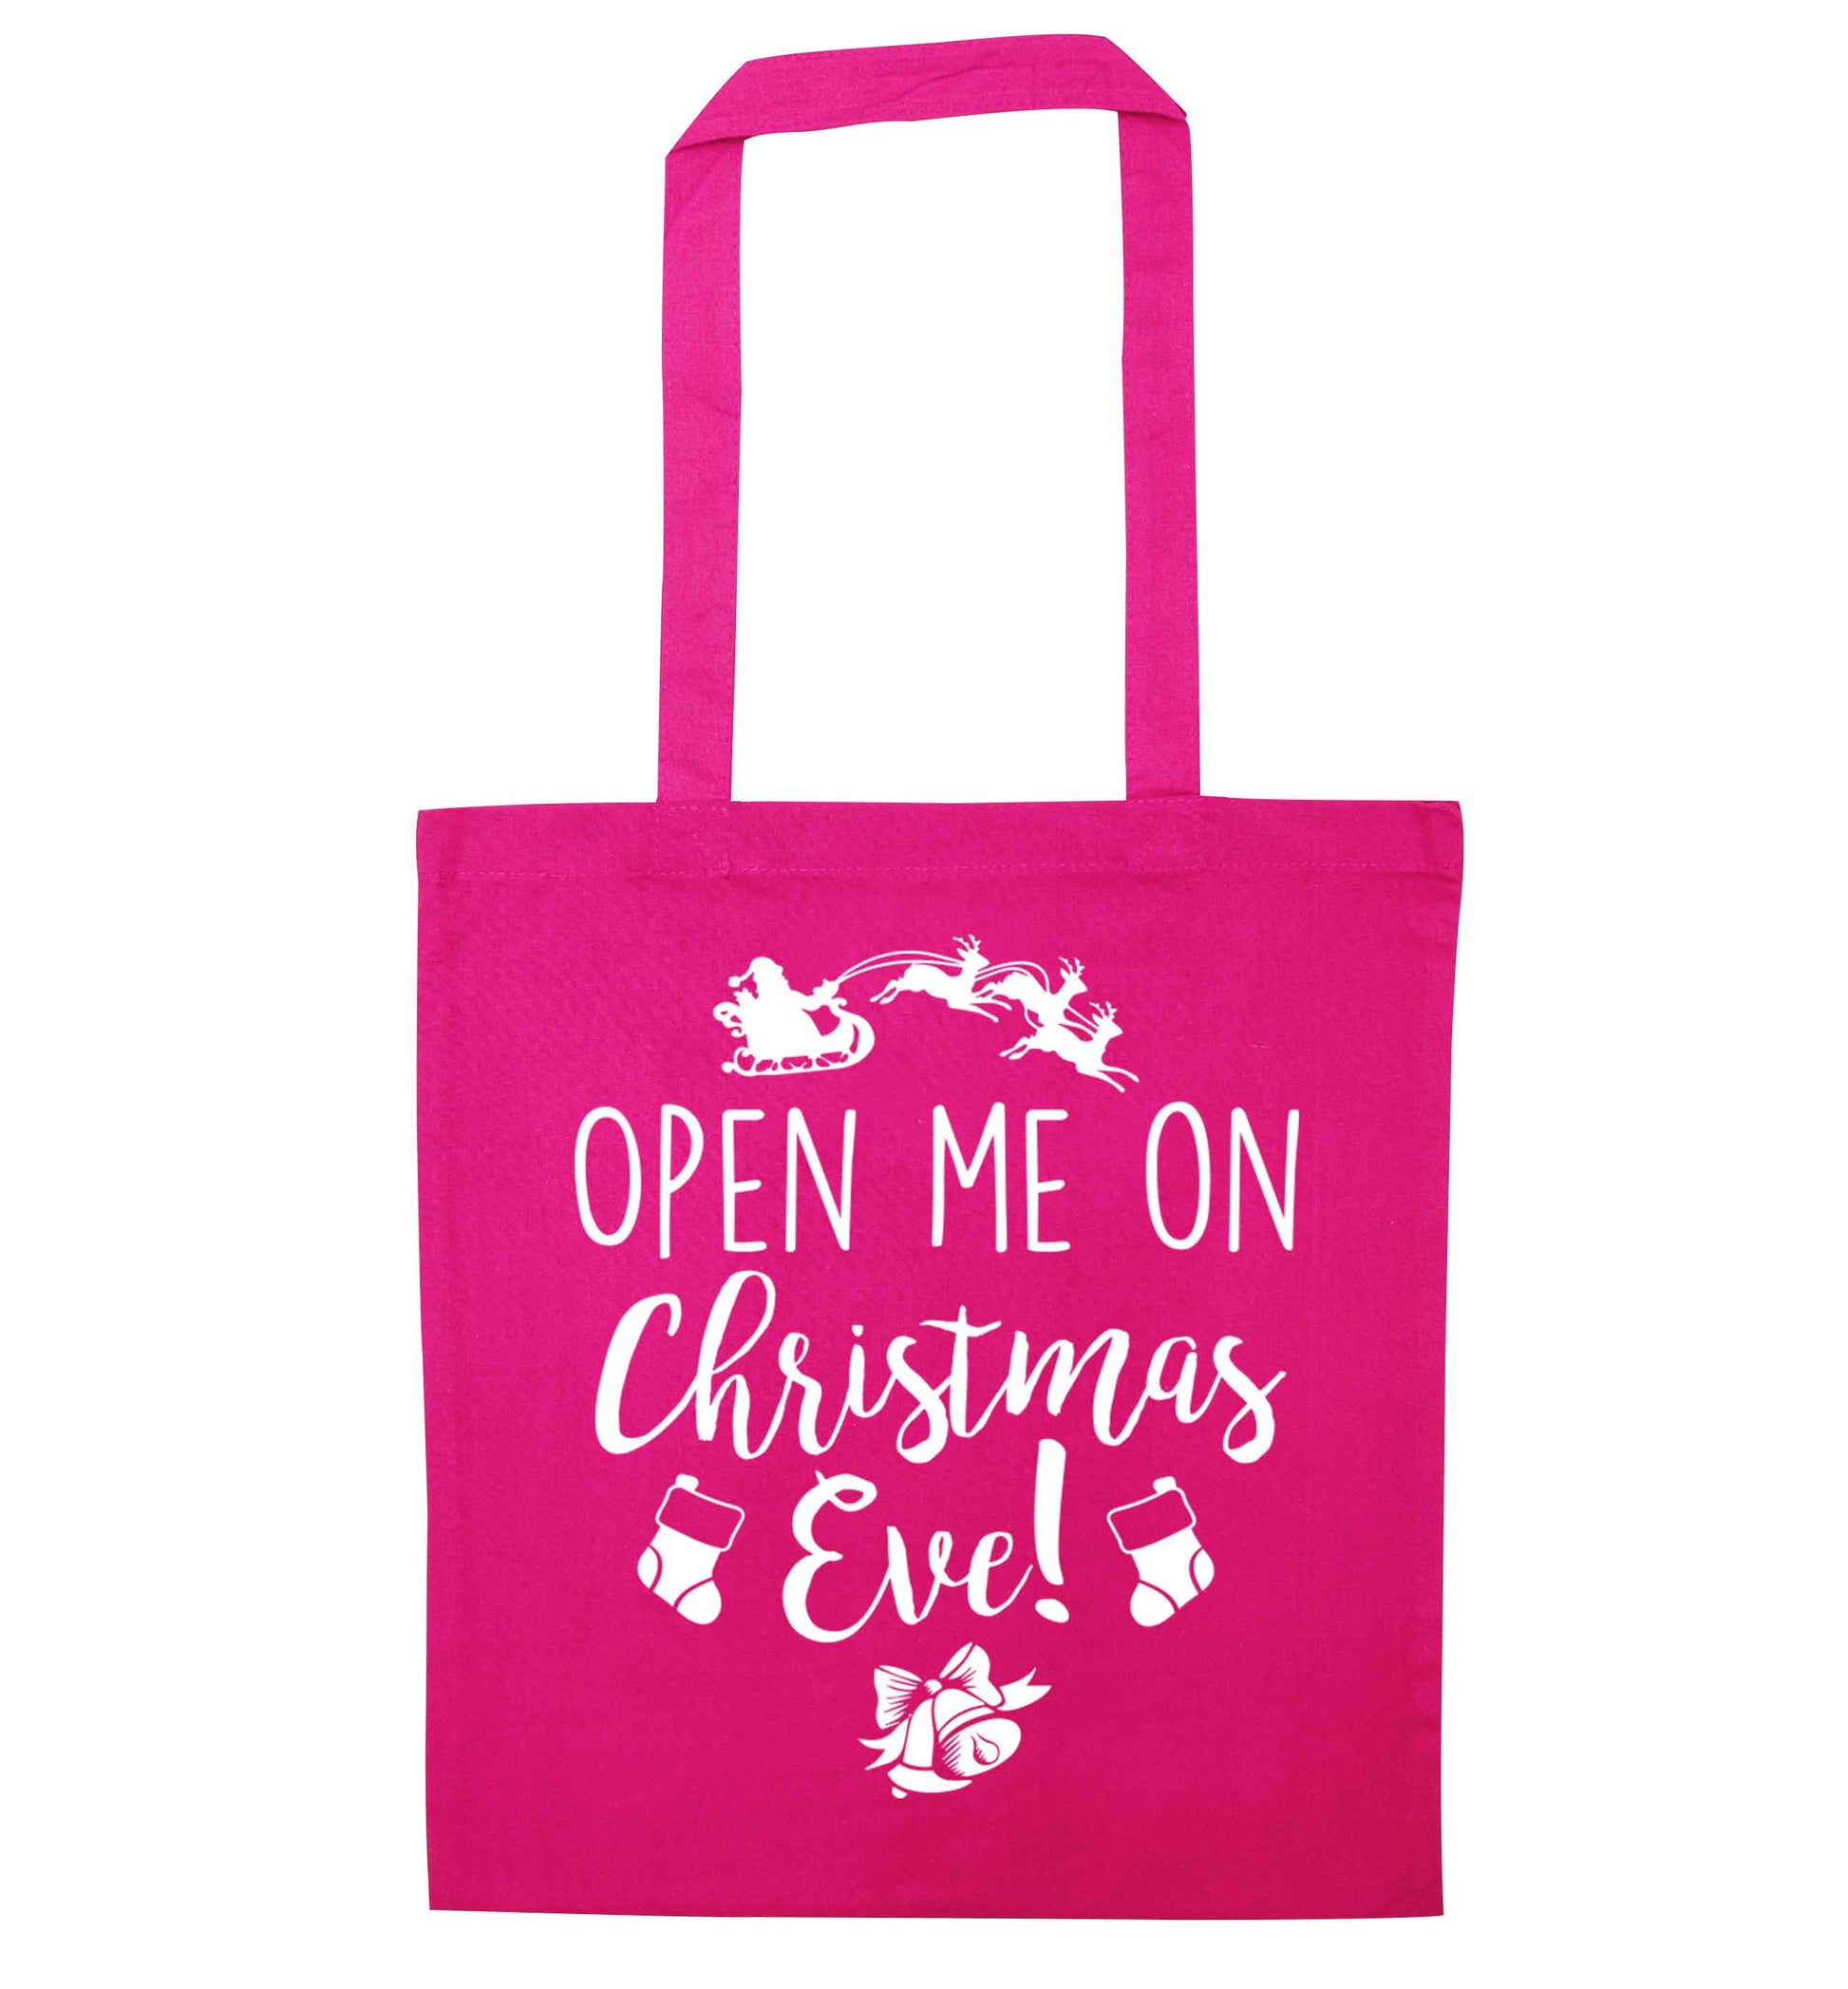 Open me on Christmas Day pink tote bag